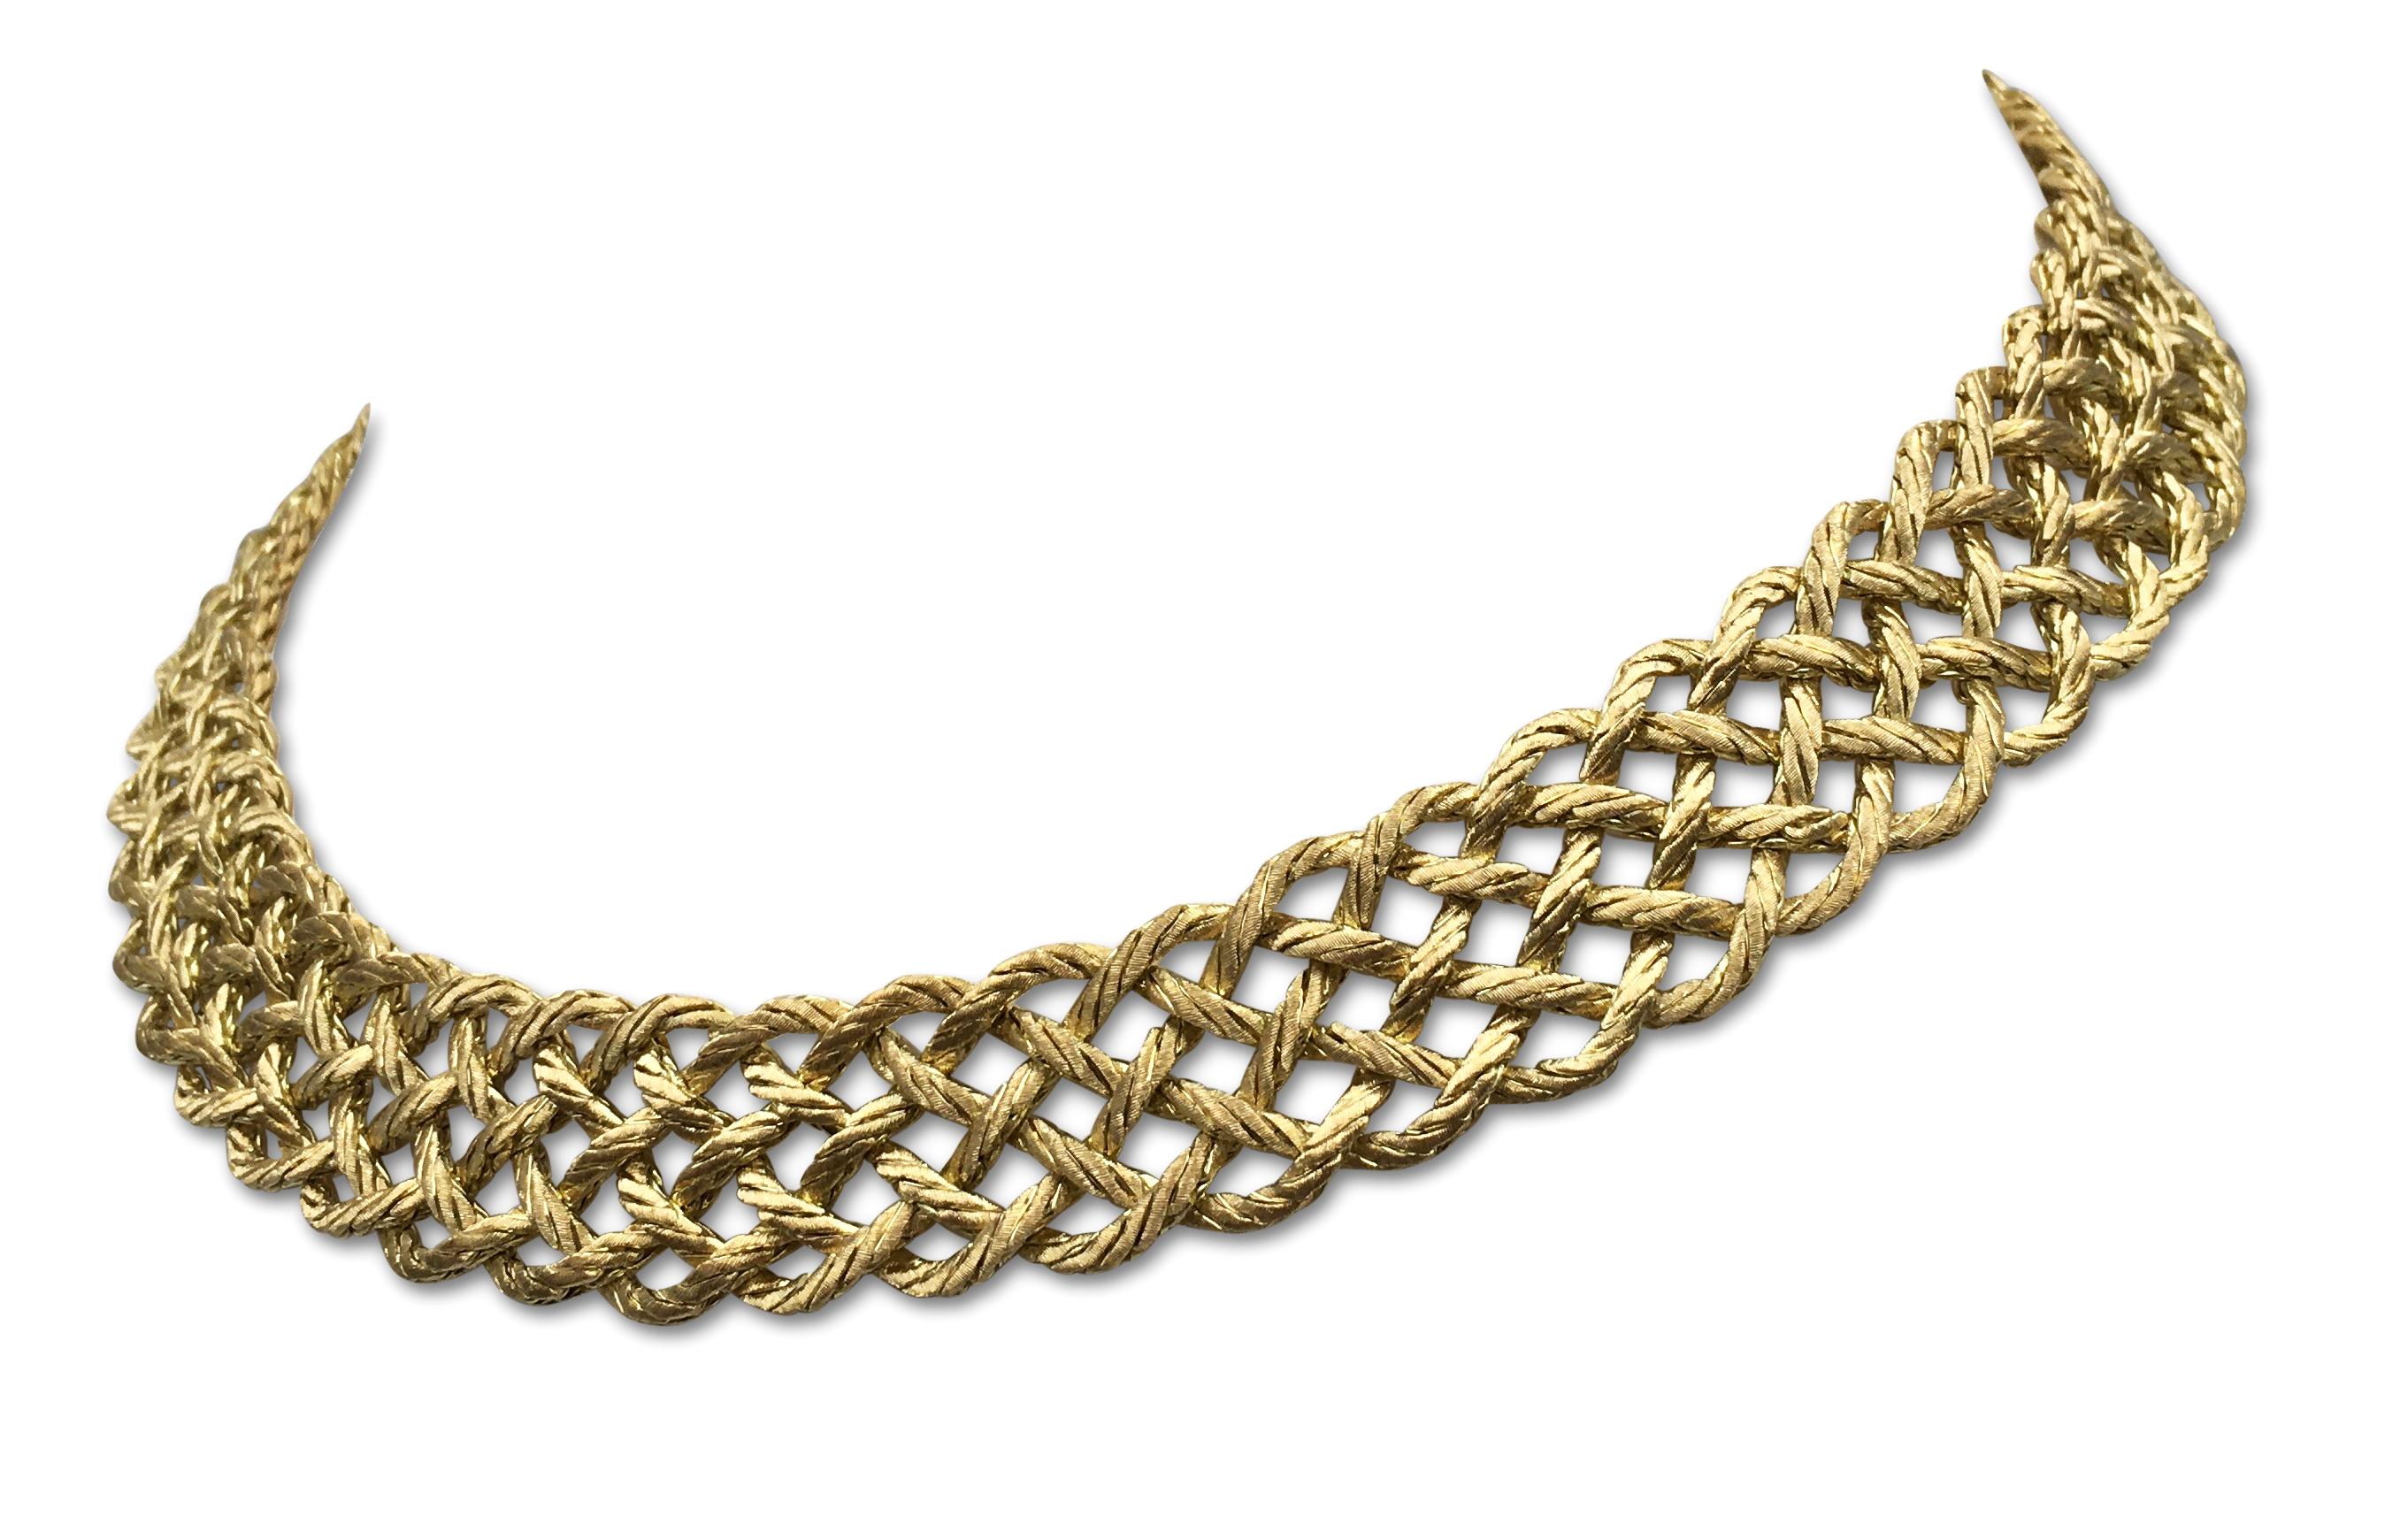 Authentic elegant Buccellati 'Crepe de Chine' necklace is designed as a flexible collar of loosely woven 18 karat yellow gold rope. Signed Buccellati, 18KT, Italy. The necklace is not presented with the original box or papers. CIRCA 2010s.